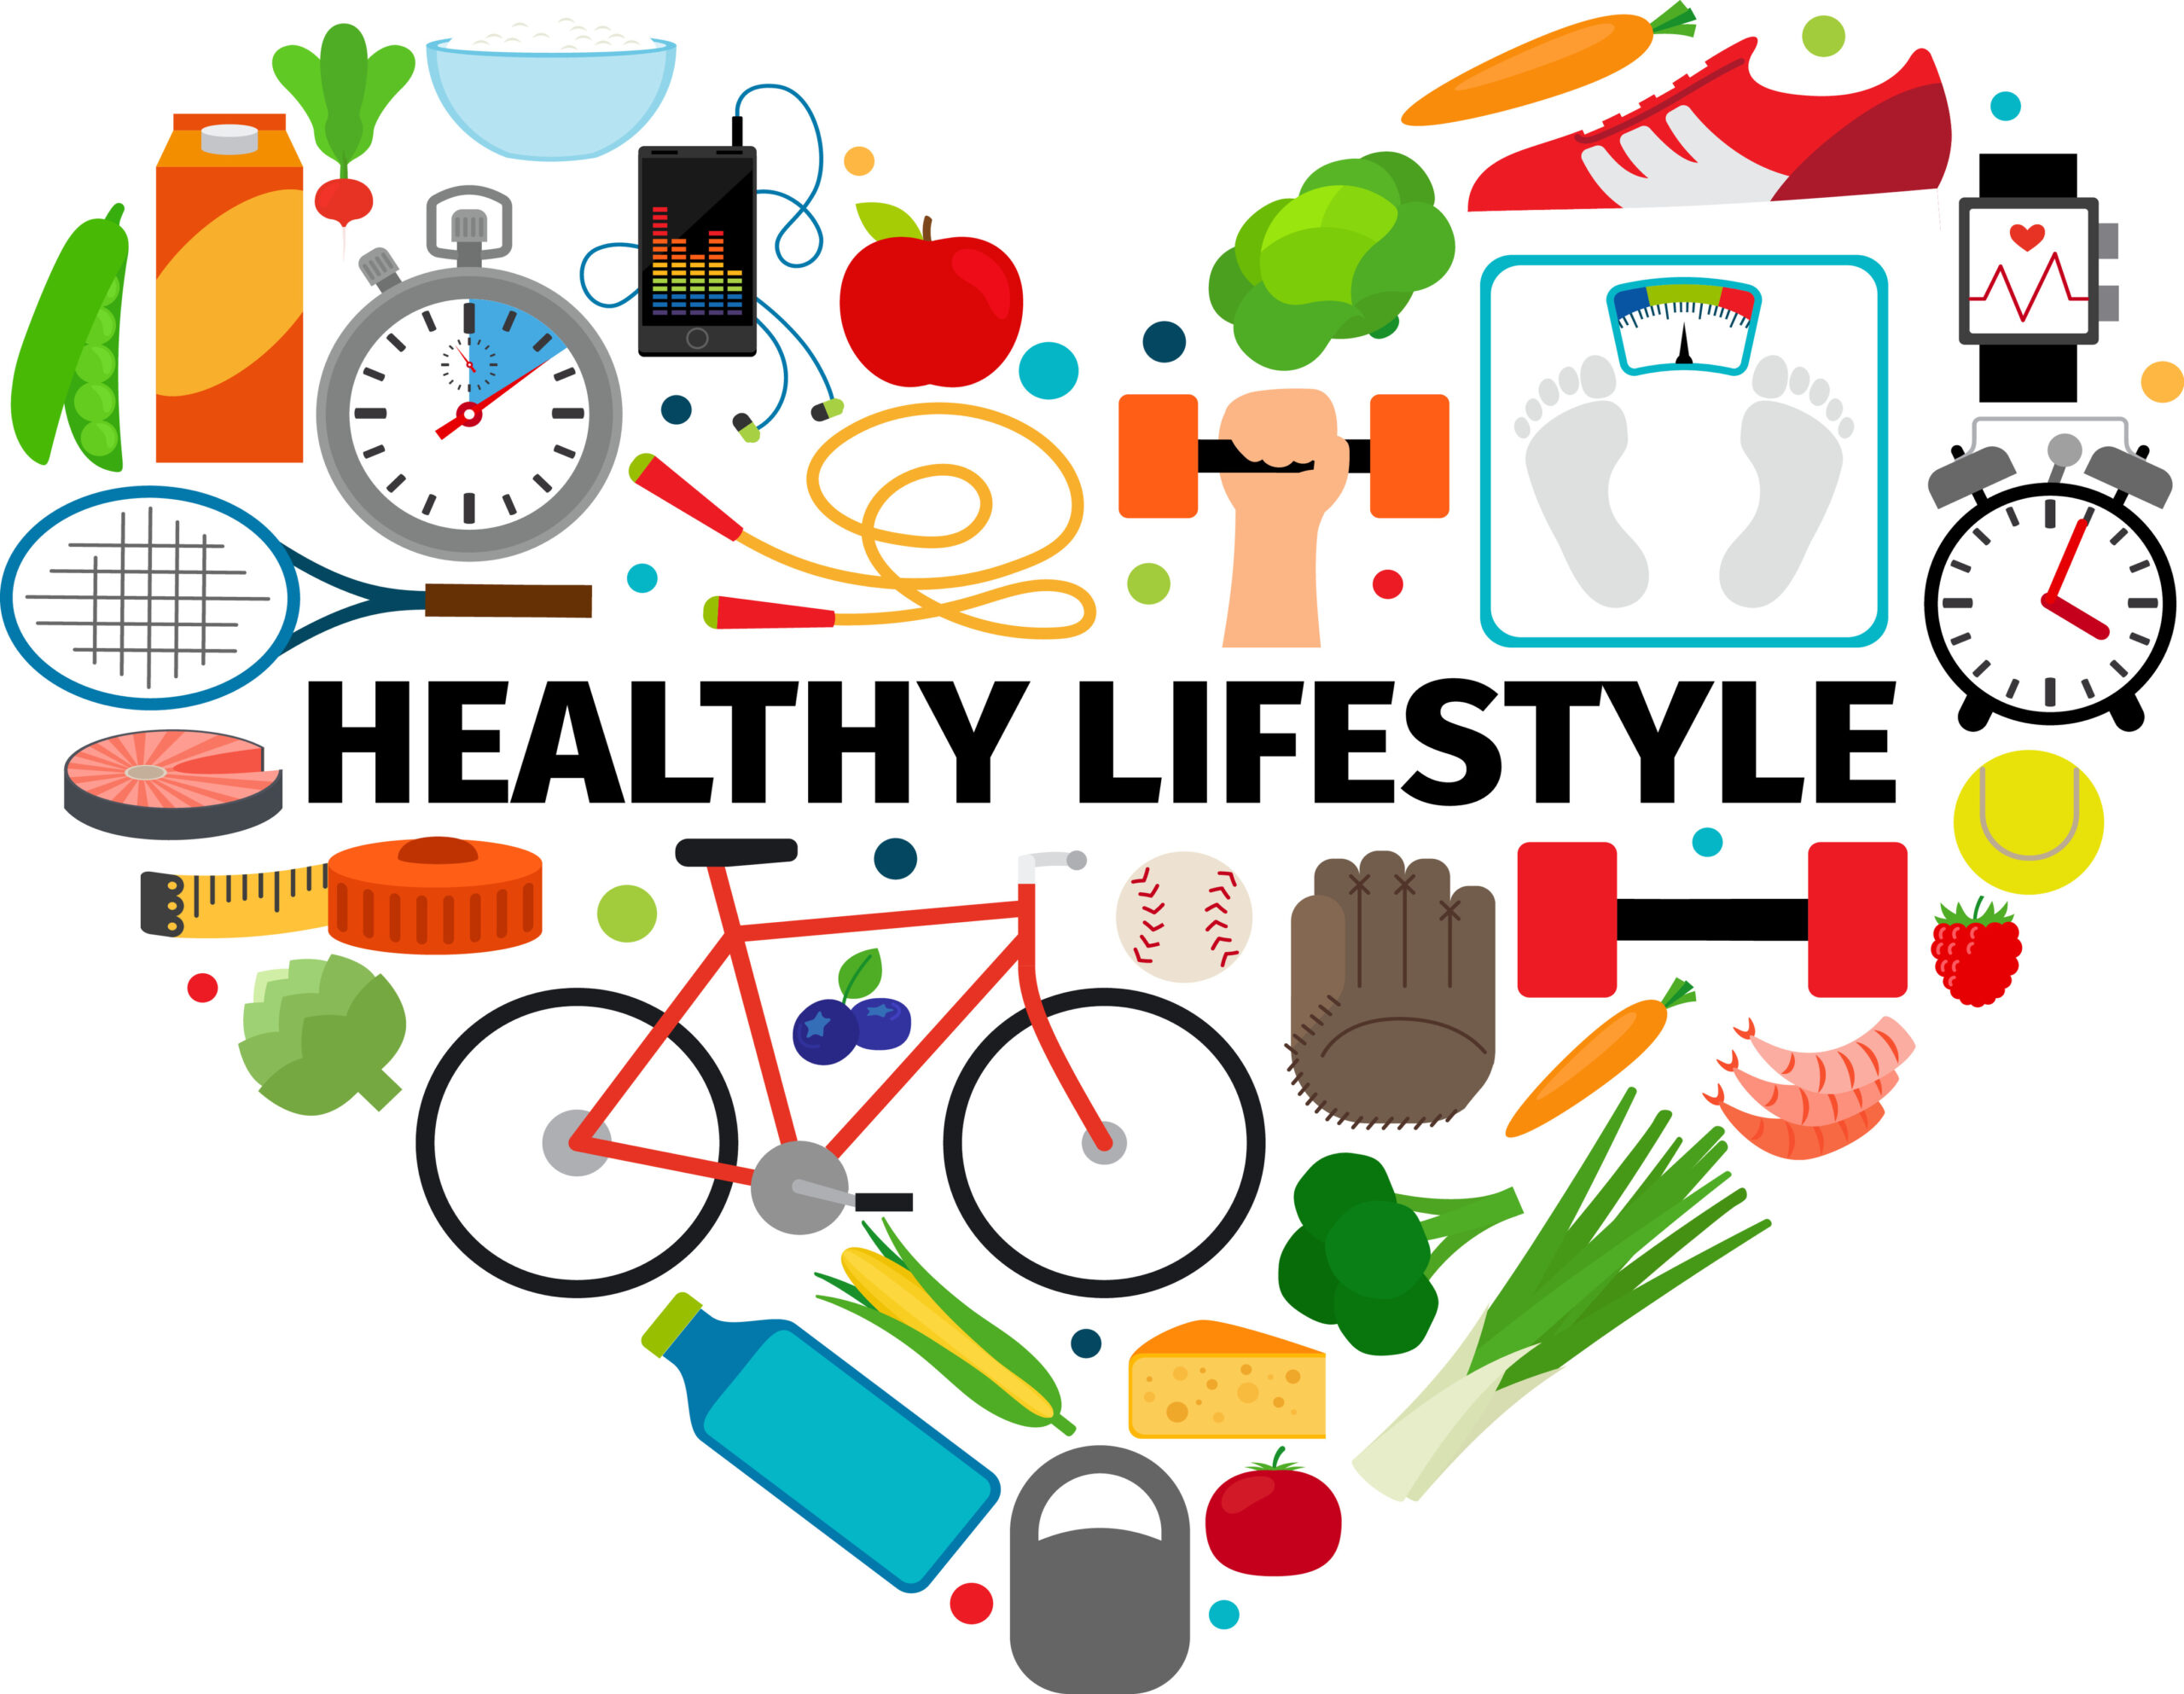 It’s Never Too Late To Make Healthful Lifestyle Changes